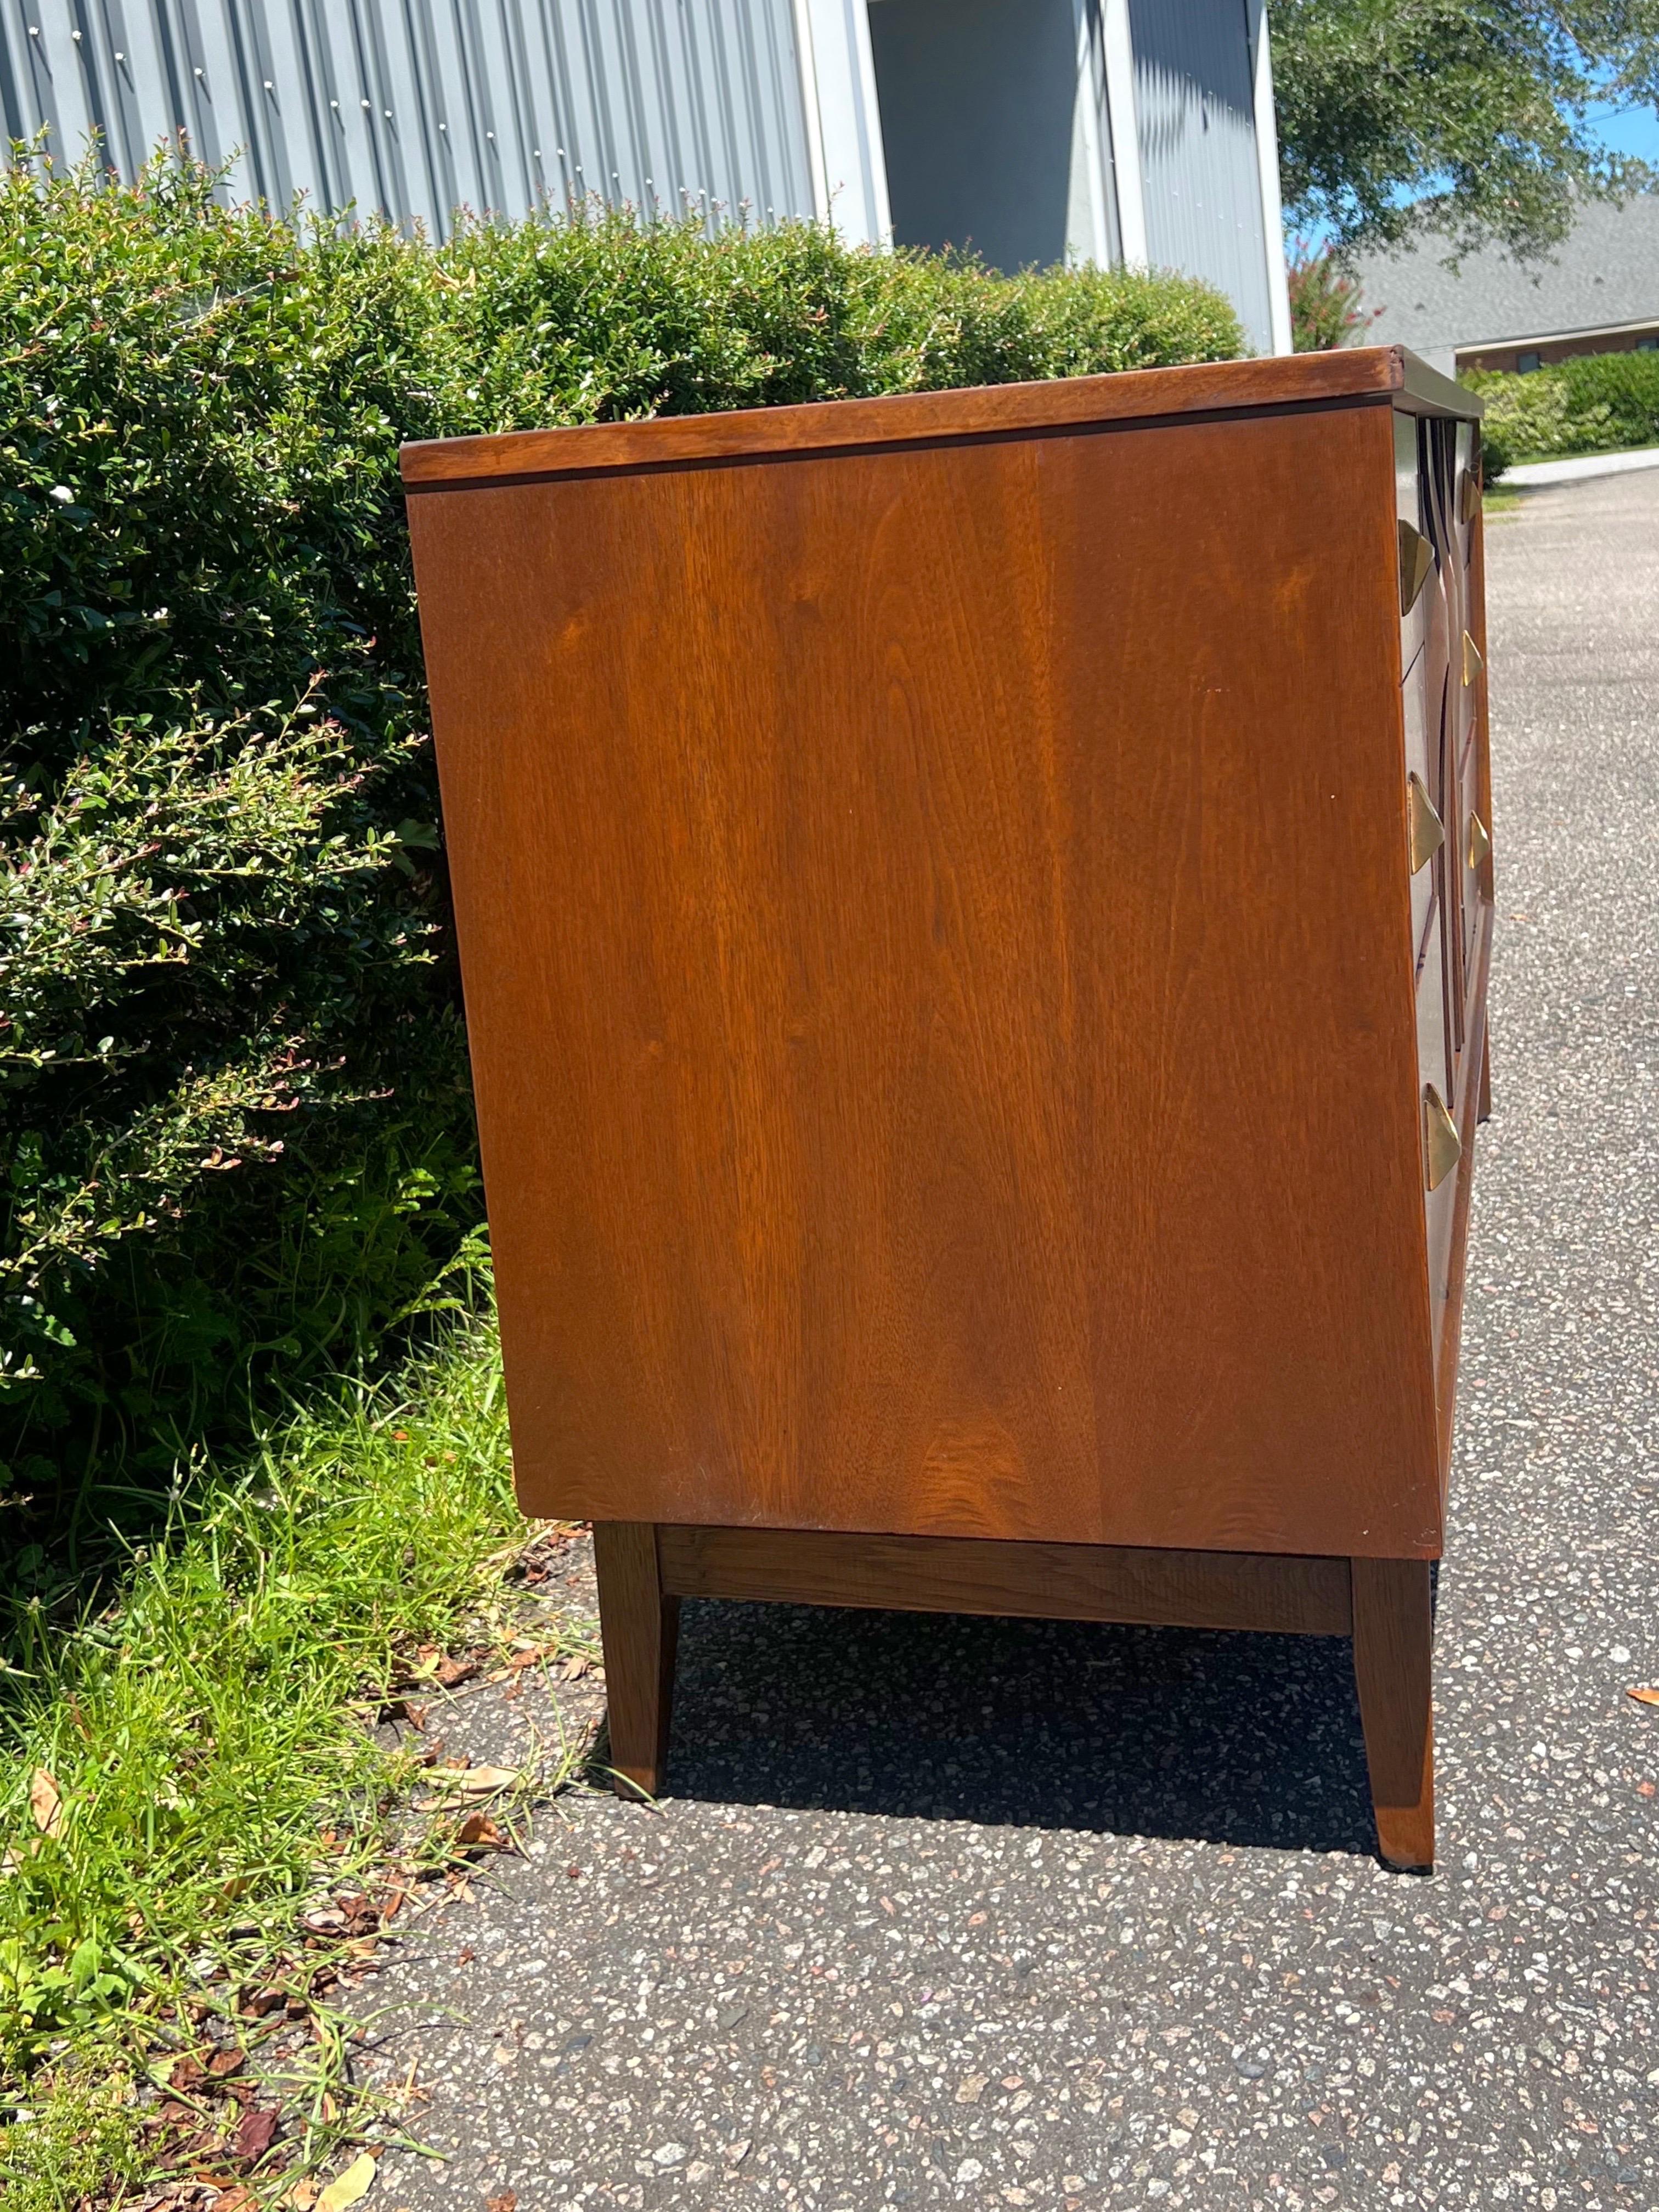 An iconic Broyhill Brasilia Mid-Century Modern sculpted walnut nine-drawer dresser. The dresser features gorgeous walnut wood grain, with sculpted arches and original pulls. The center sculpted cabinet doors open up to three drawers with an